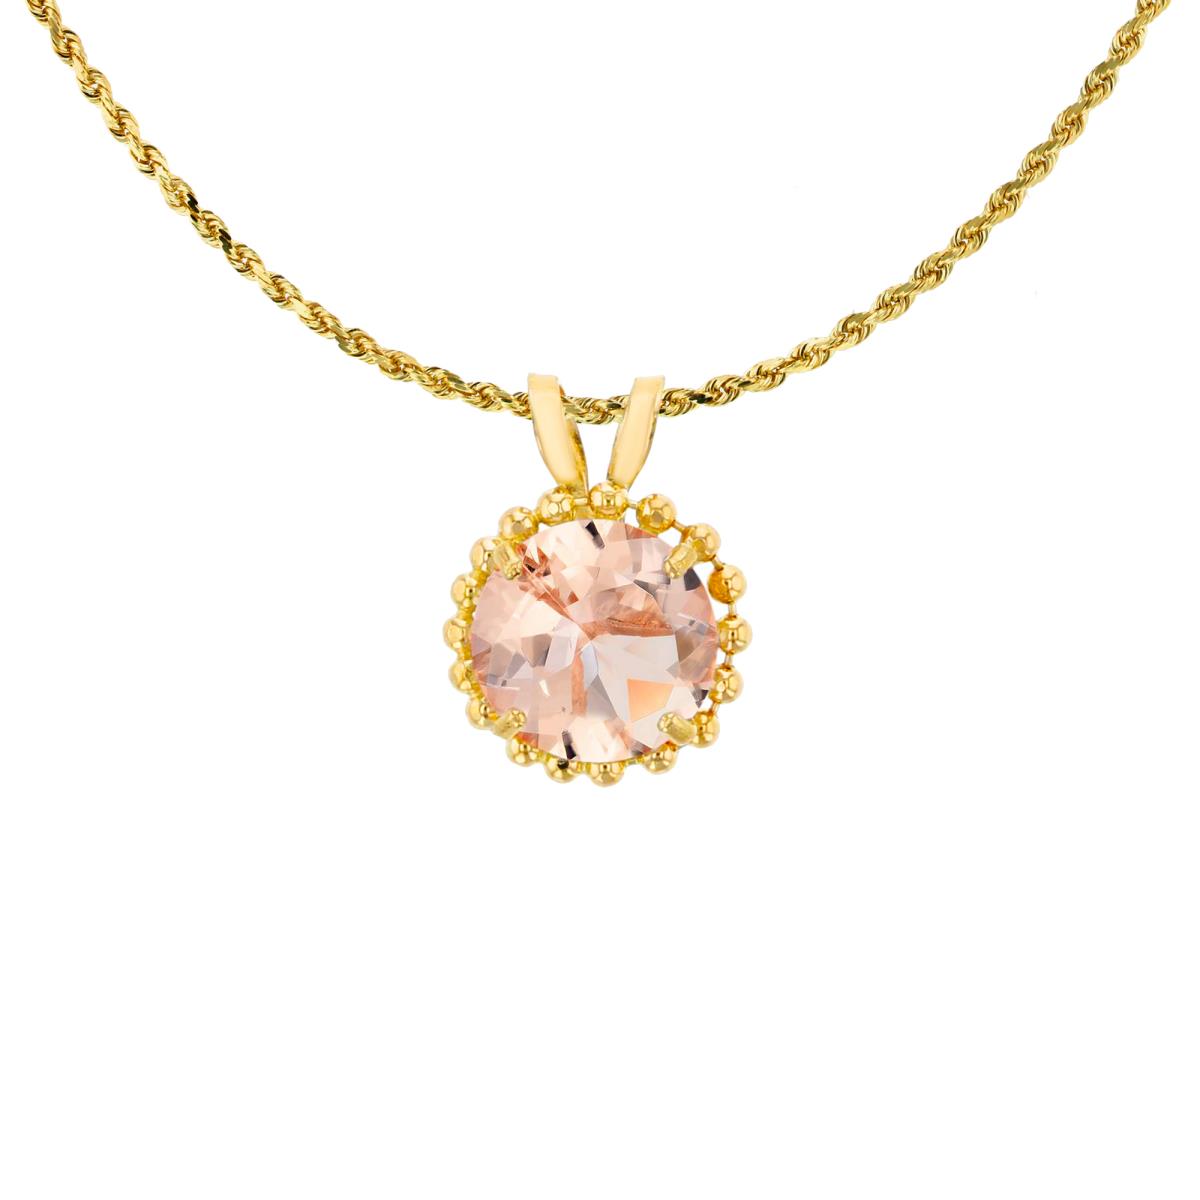 10K Yellow Gold 6mm Rd Cut Morganite with Bead Frame Rabbit Ear 18" Necklace